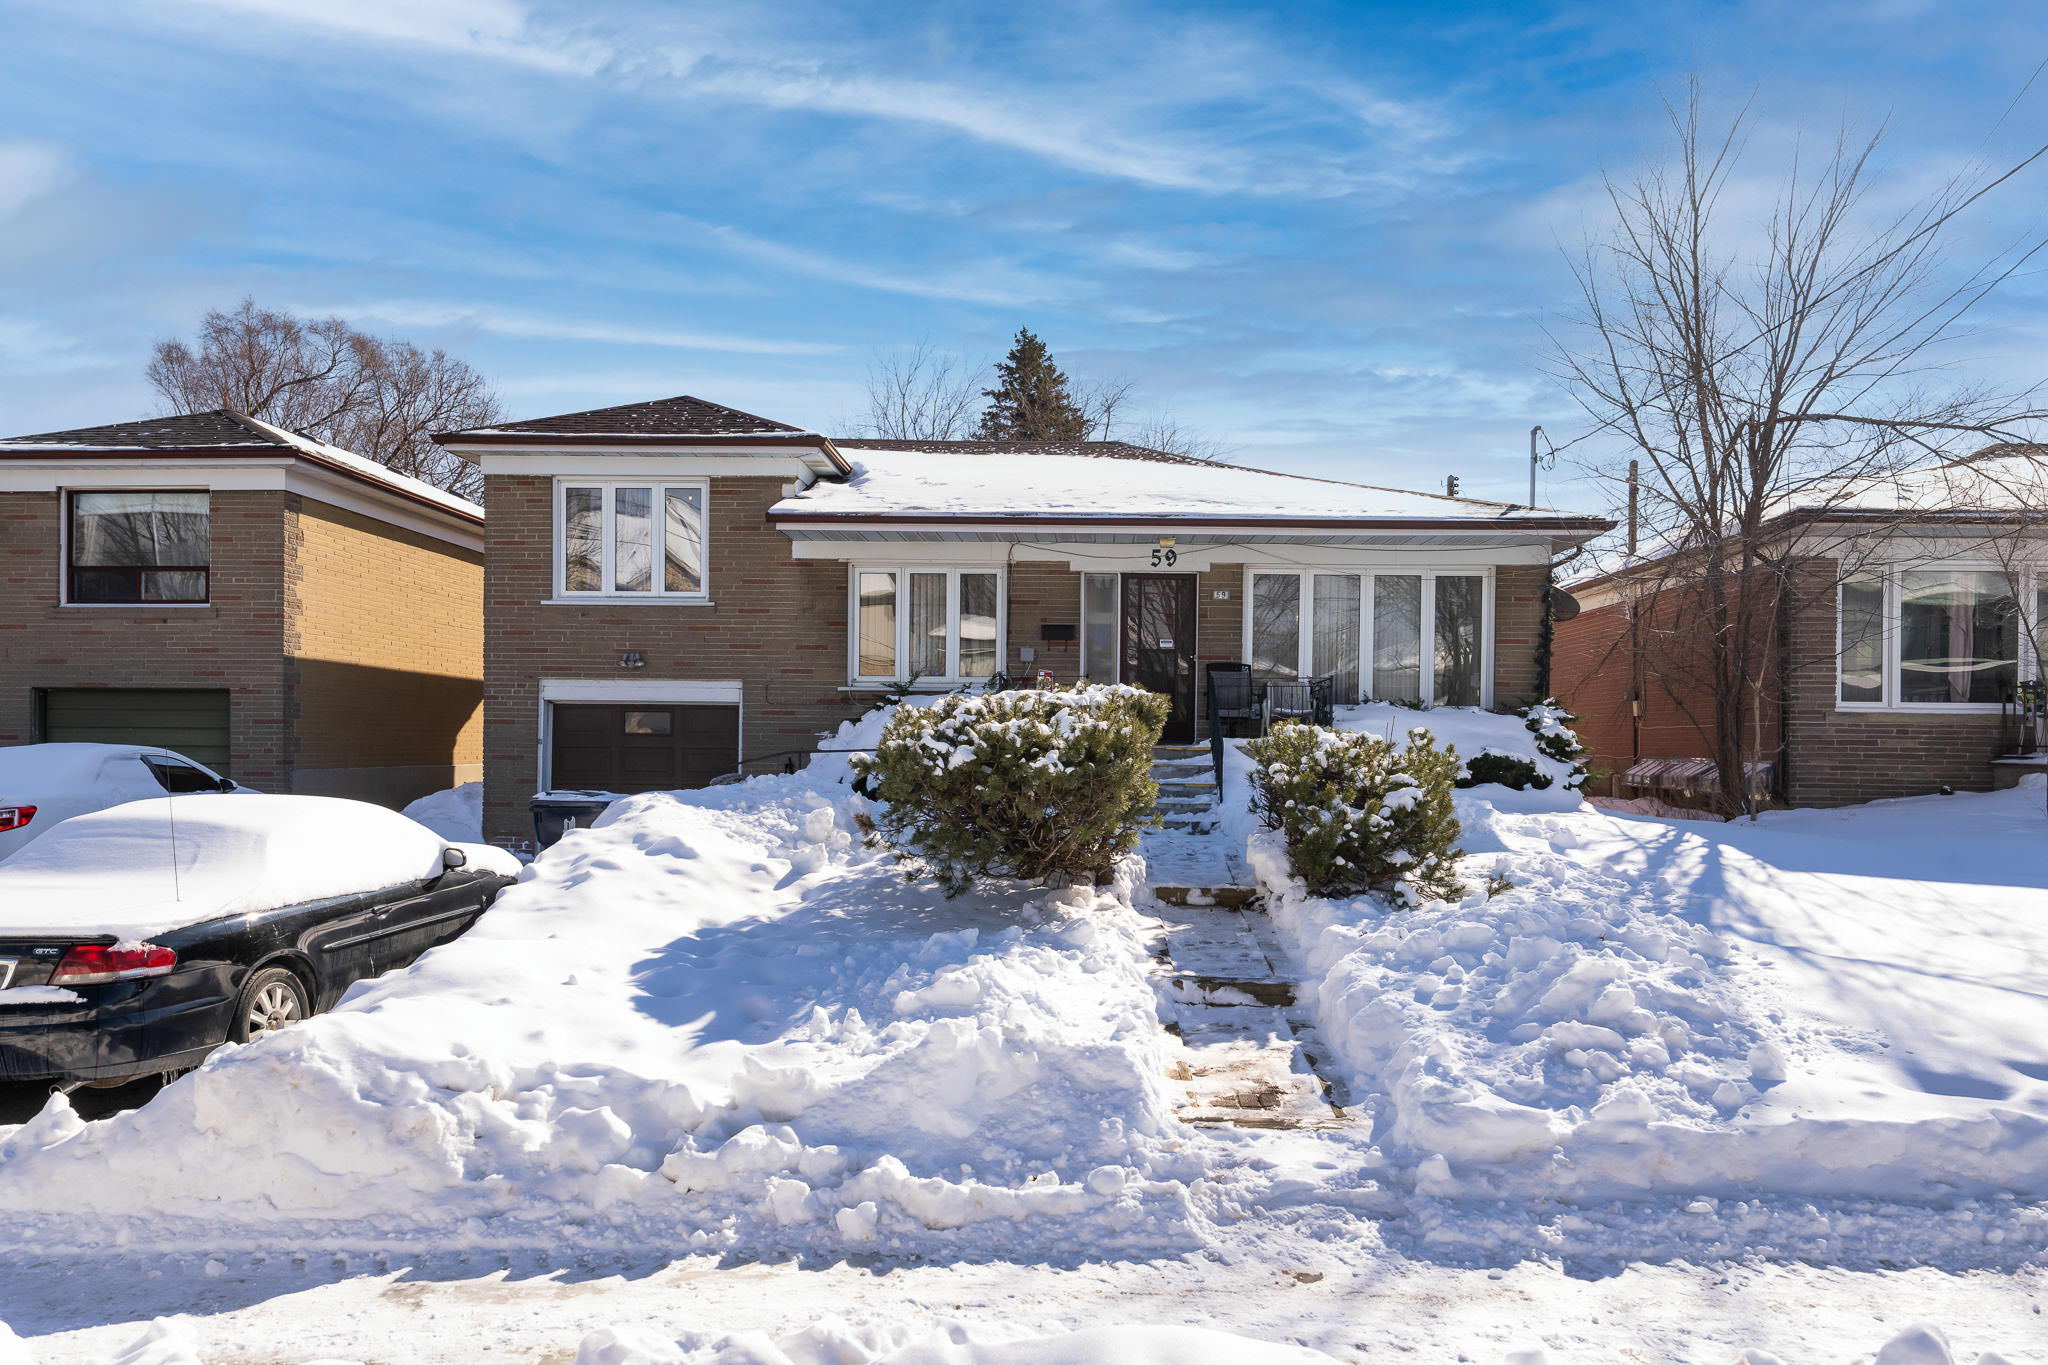 59 Danby Ave, North York, ON M3H 2J4, Canada